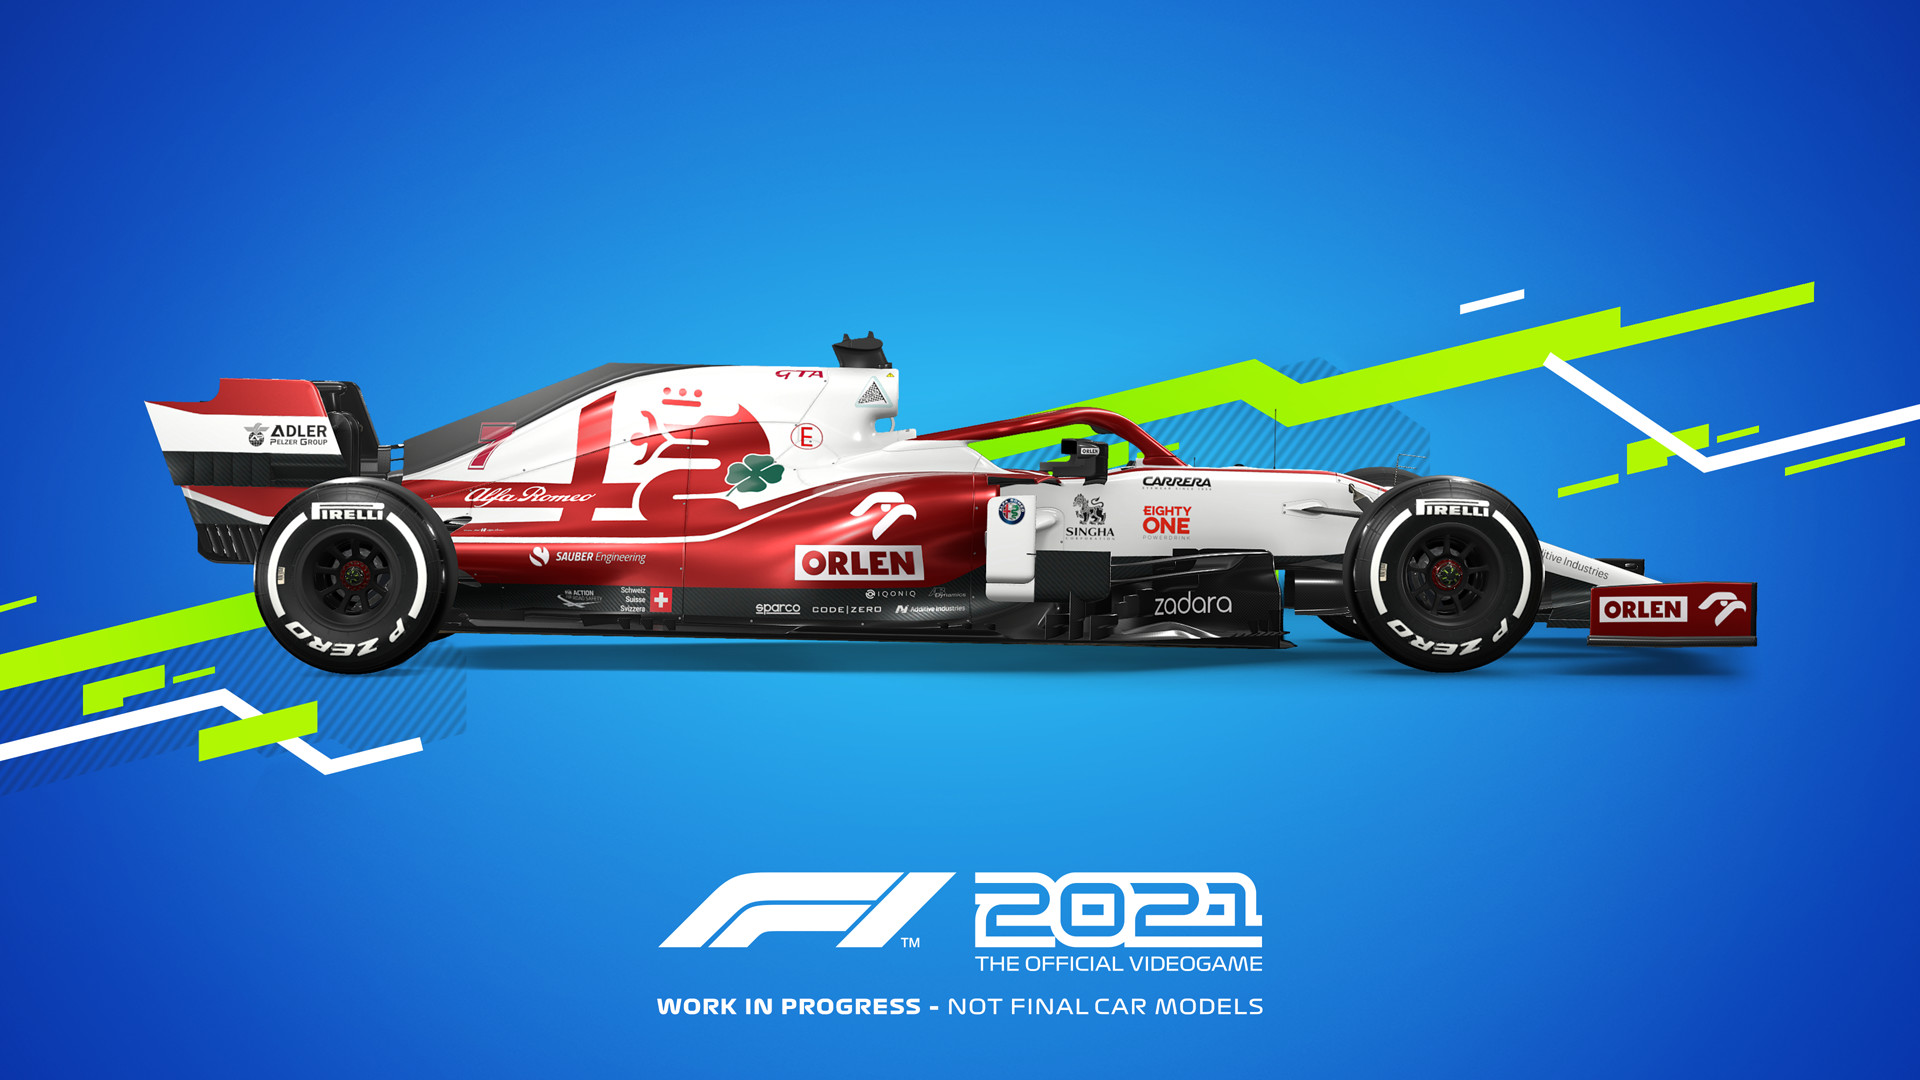 F1 2021 PlayStation 4 Account Pixelpuffin.net Activation Link